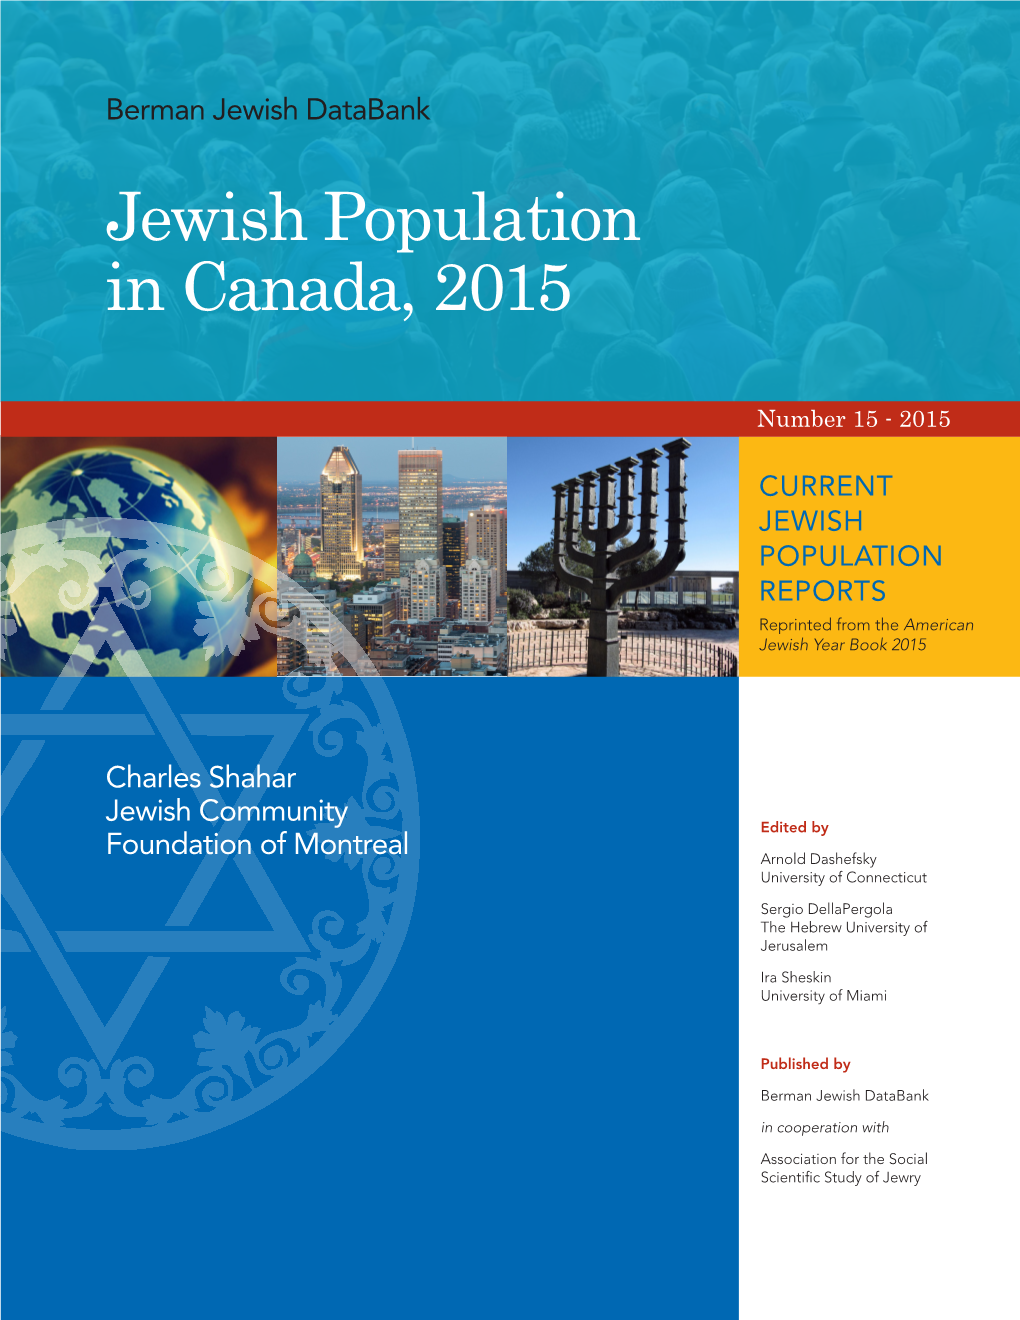 Jewish Population in Canada, 2015 from the American Jewish Year Book